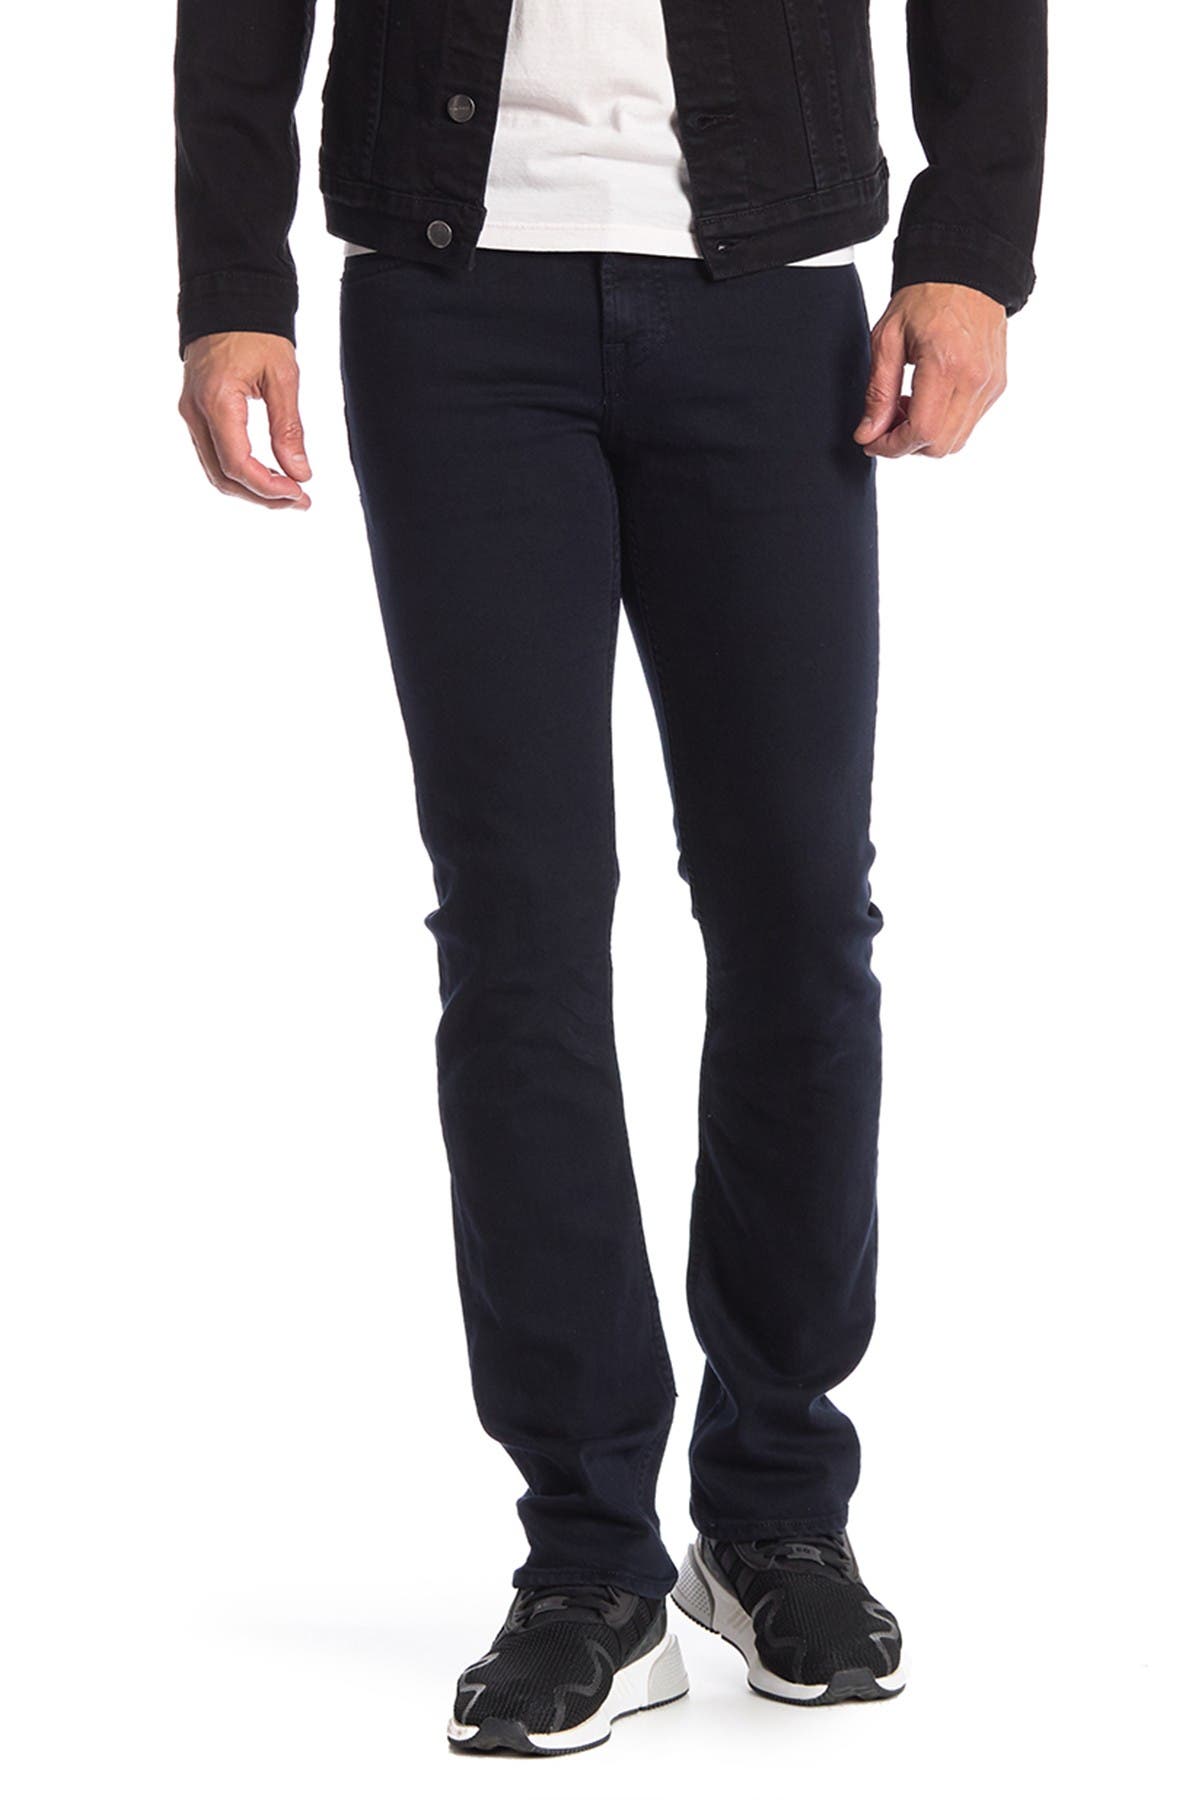 7 for all mankind men's slimmy jeans